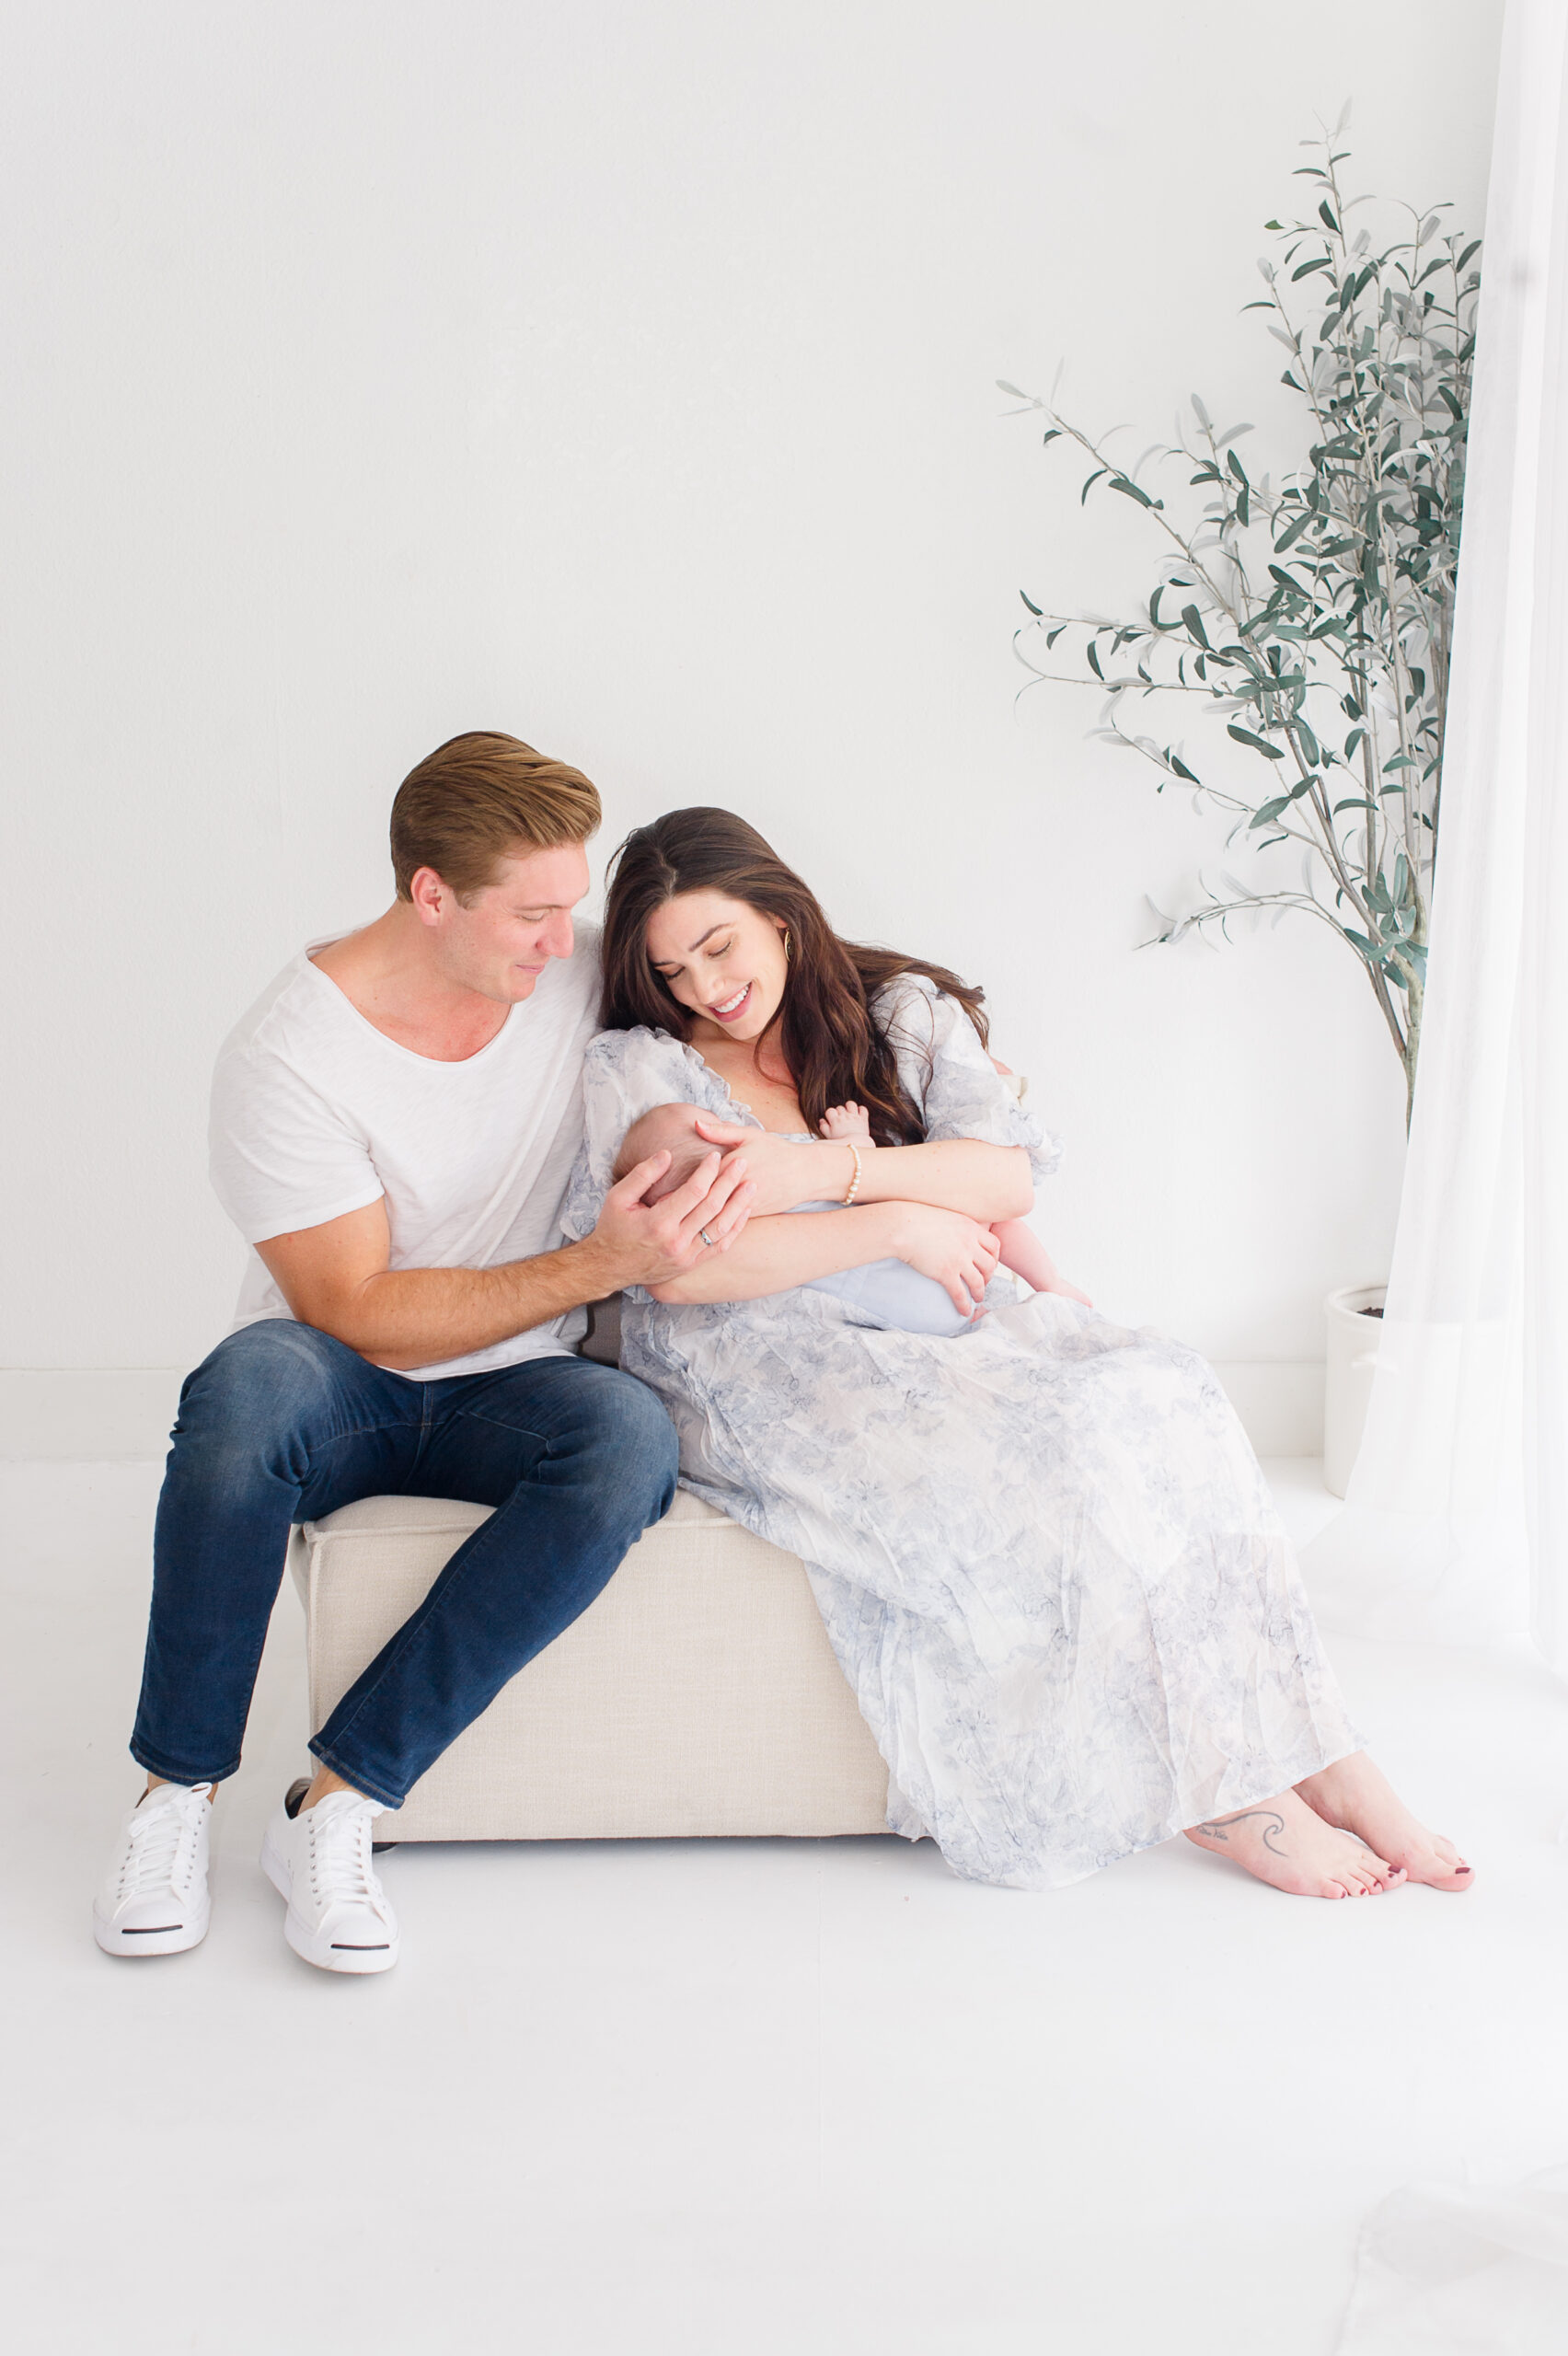 Studio newborn image of a mother and father holding their sweet newborn baby close on a couch in a natural light studio.